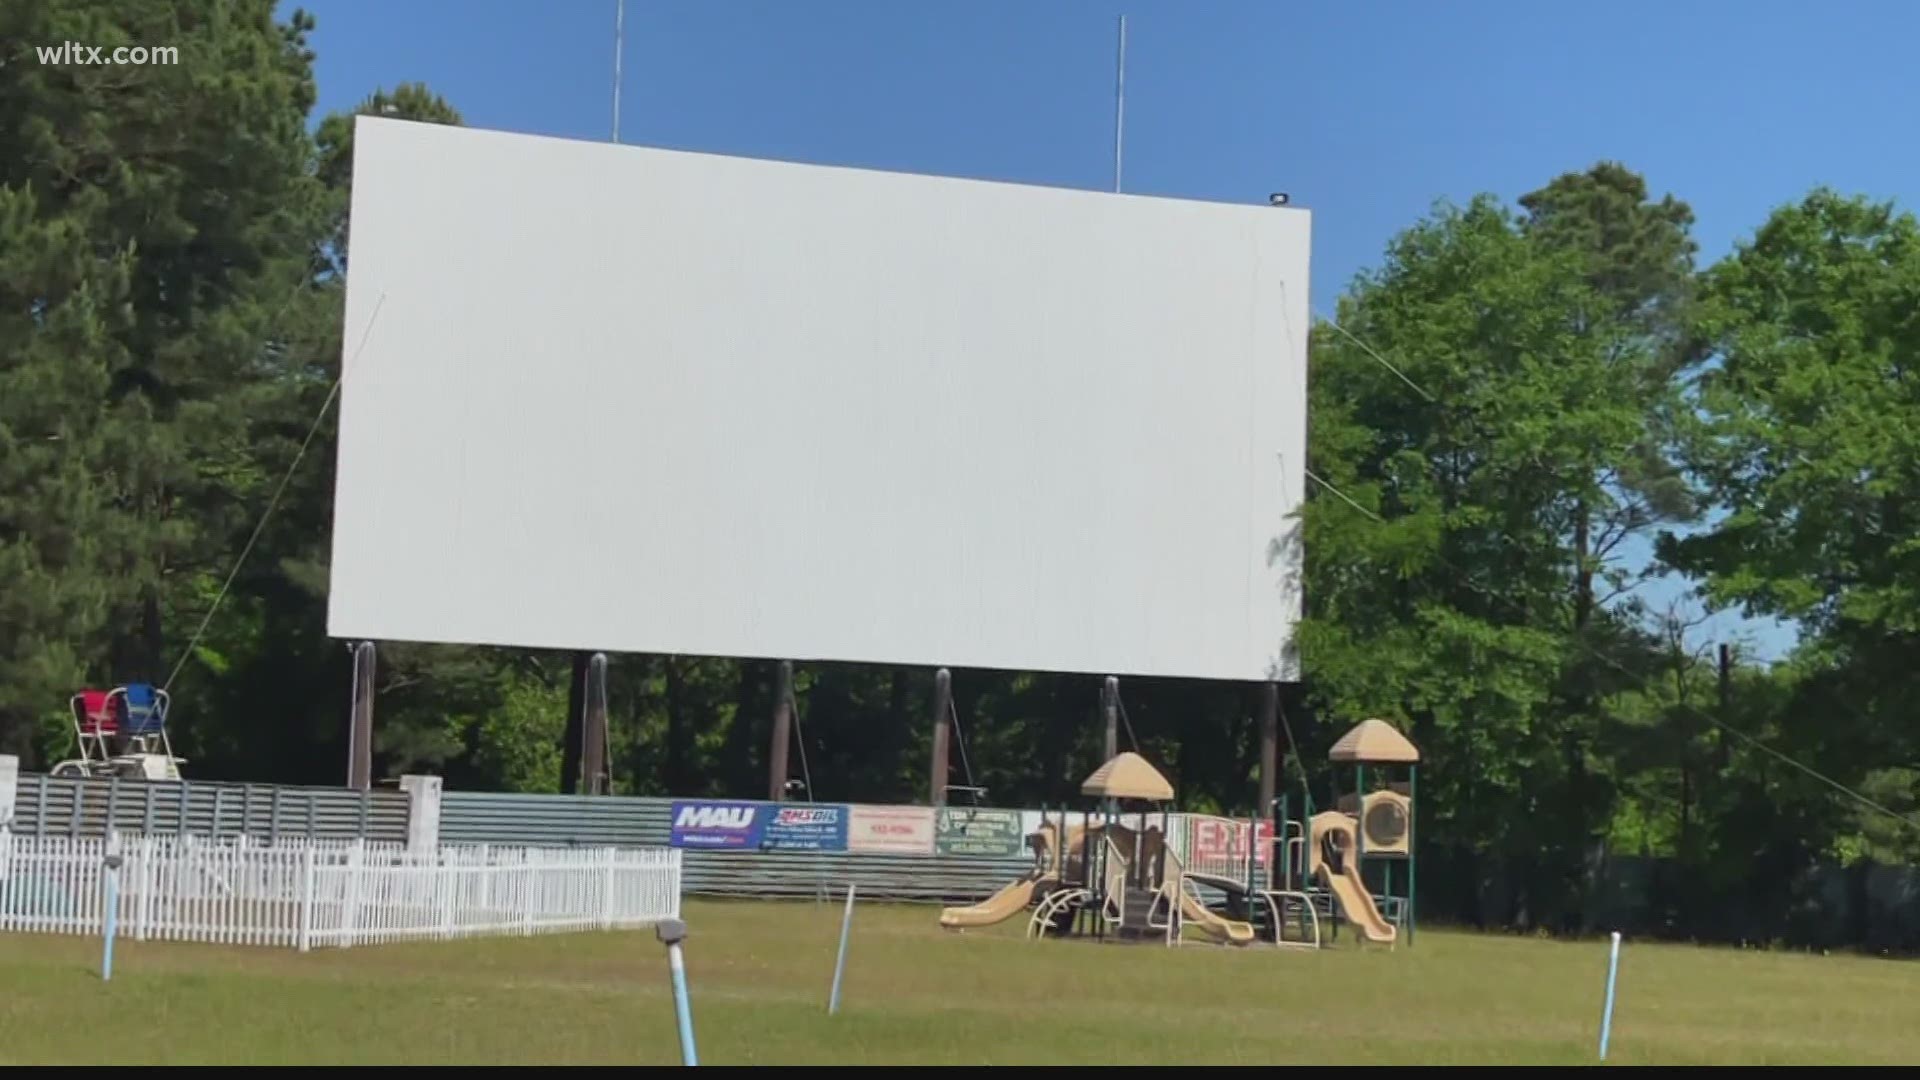 The Monetta Drive-In Theatre, better known as "The Big Mo," plans to open in the middle of May.